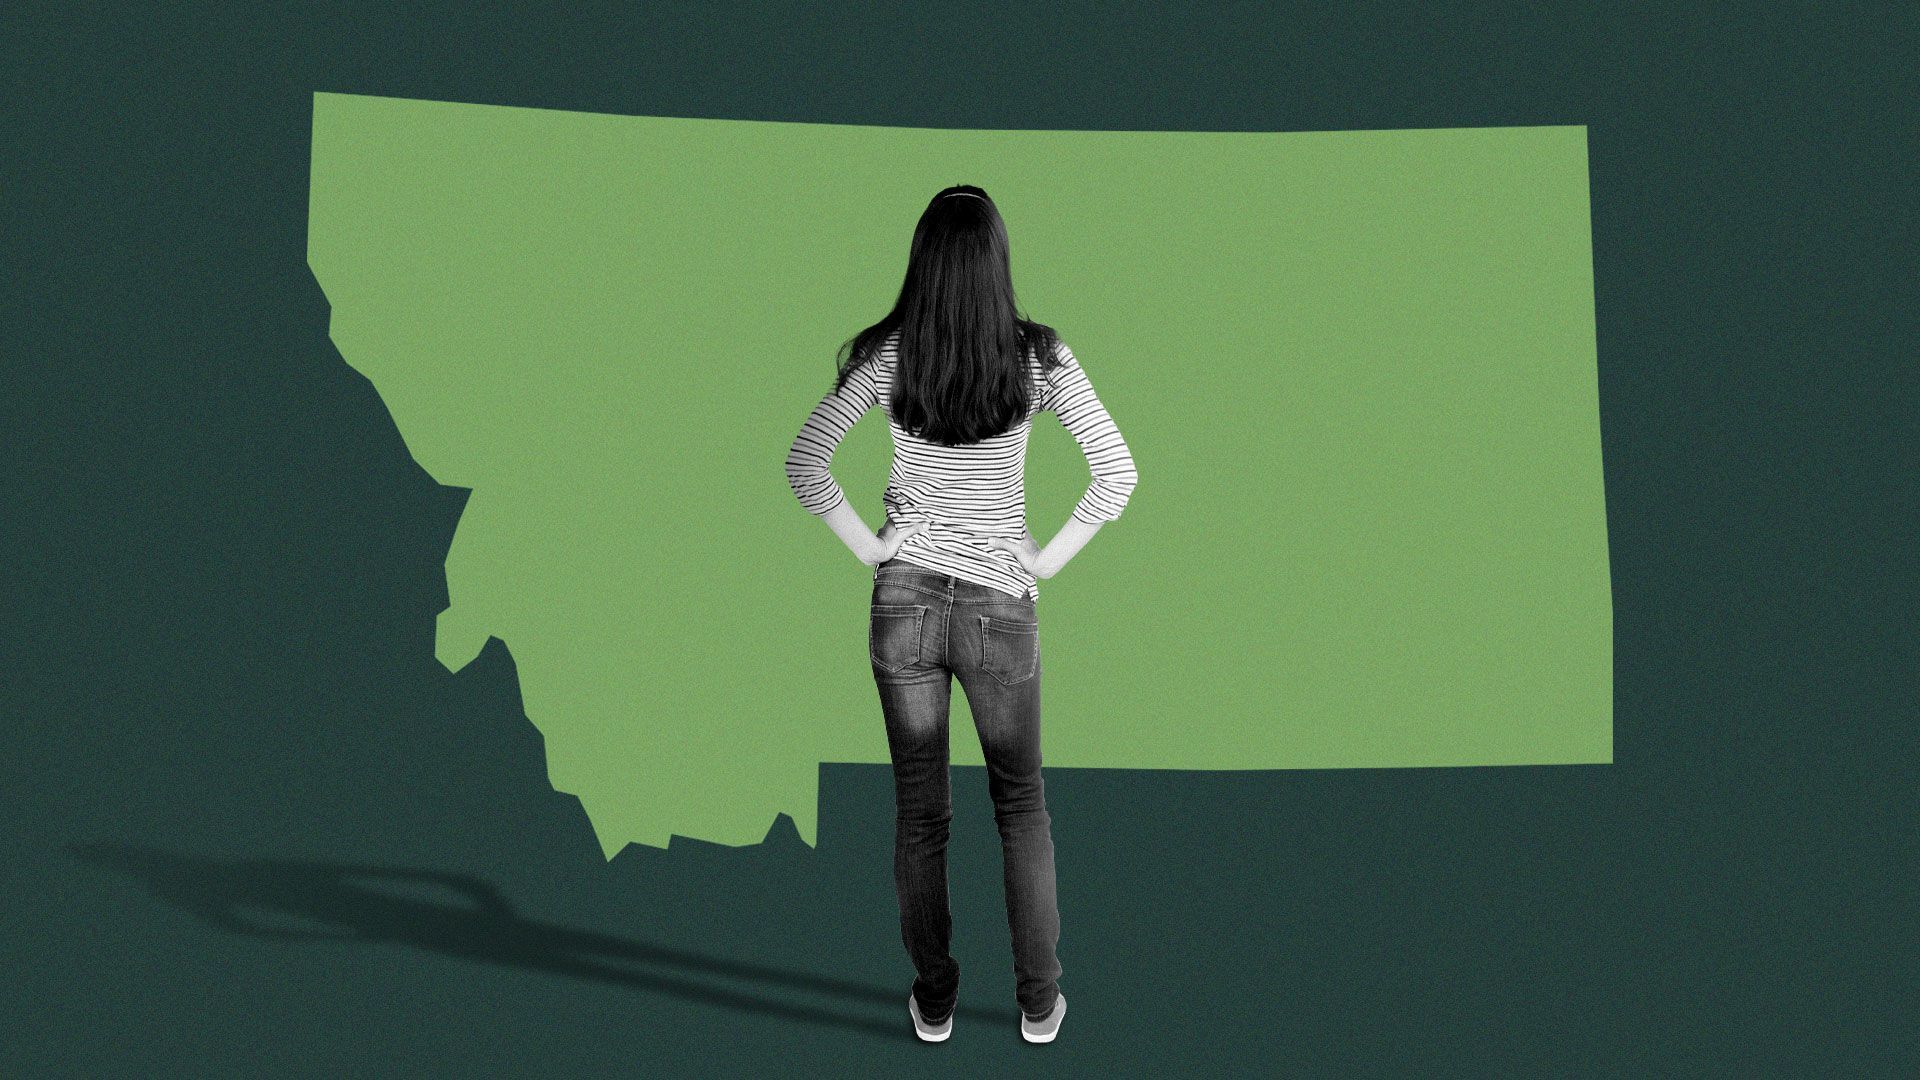 Illustration of a young girl looking at the state of Montana.